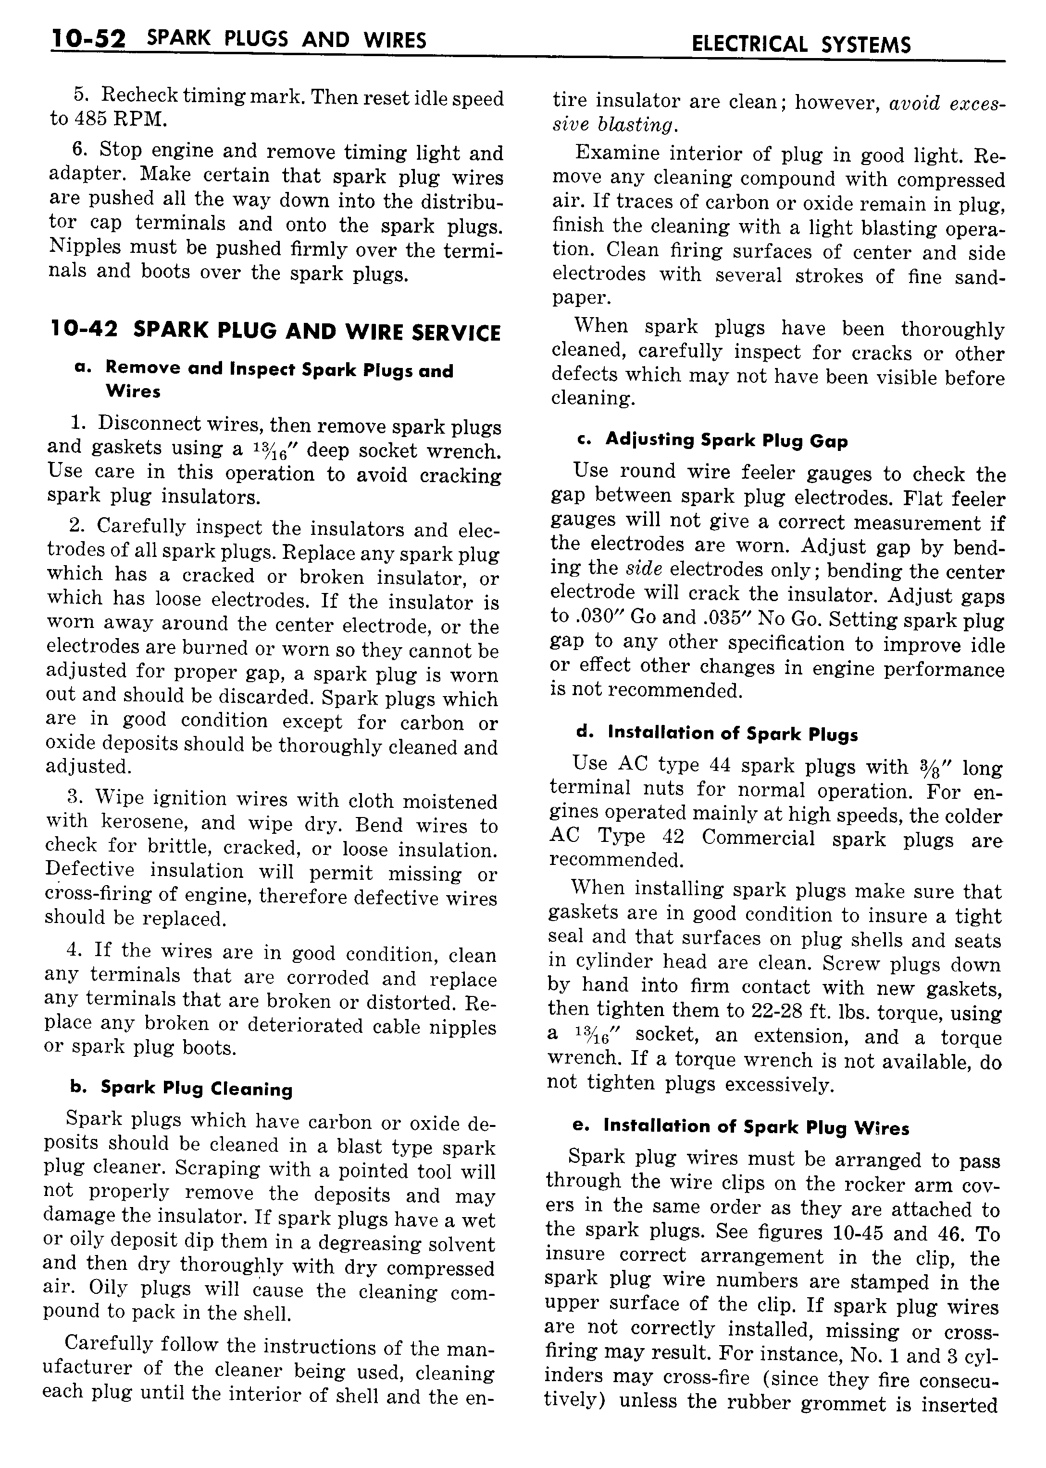 n_11 1957 Buick Shop Manual - Electrical Systems-052-052.jpg